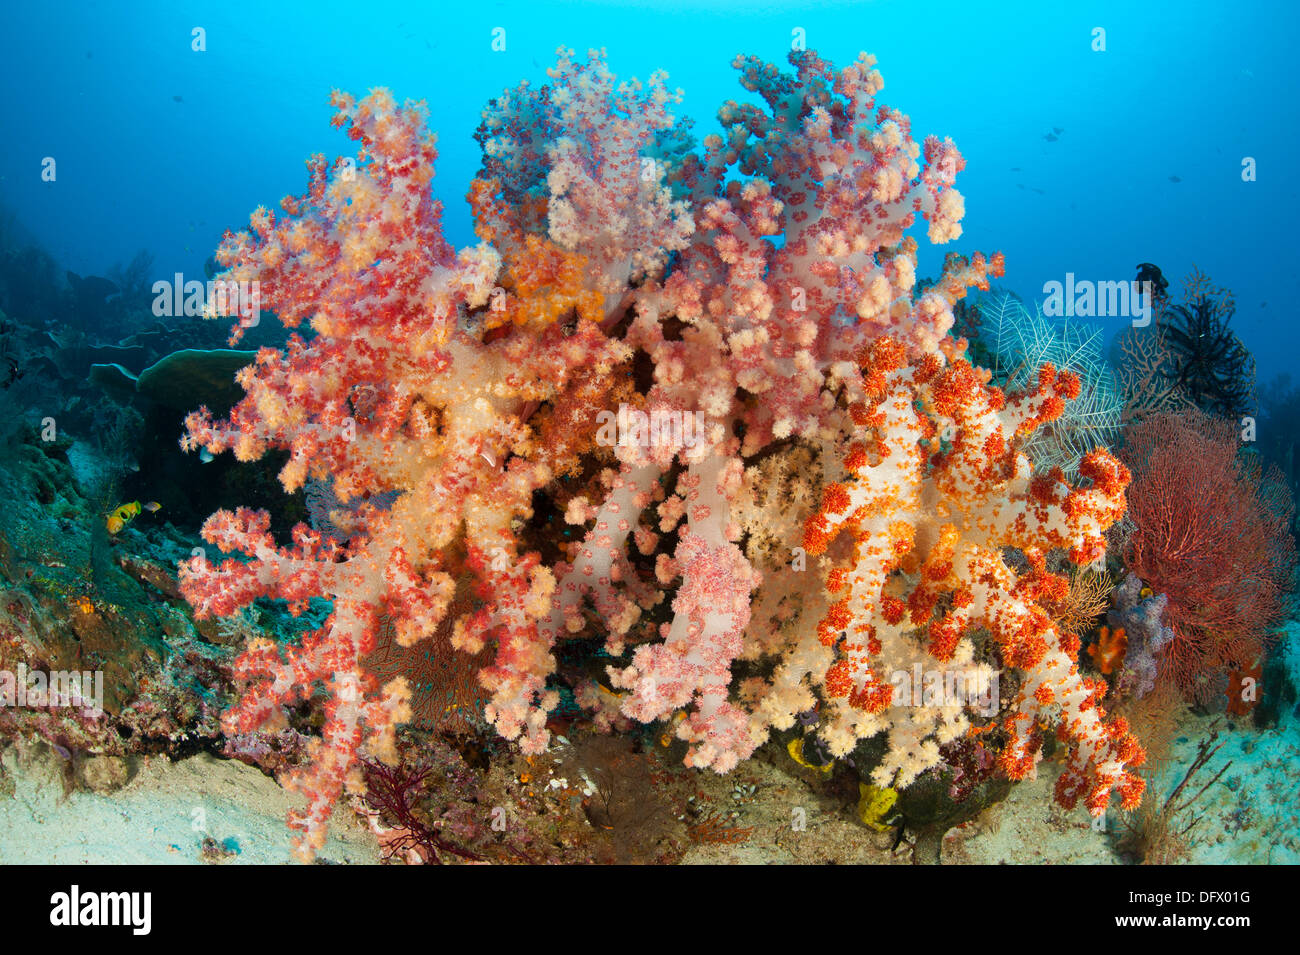 Colorful soft corals (Dendronephthya sp.) adorn a reef in Raja Ampat, West Papua, Indonesia. Stock Photo